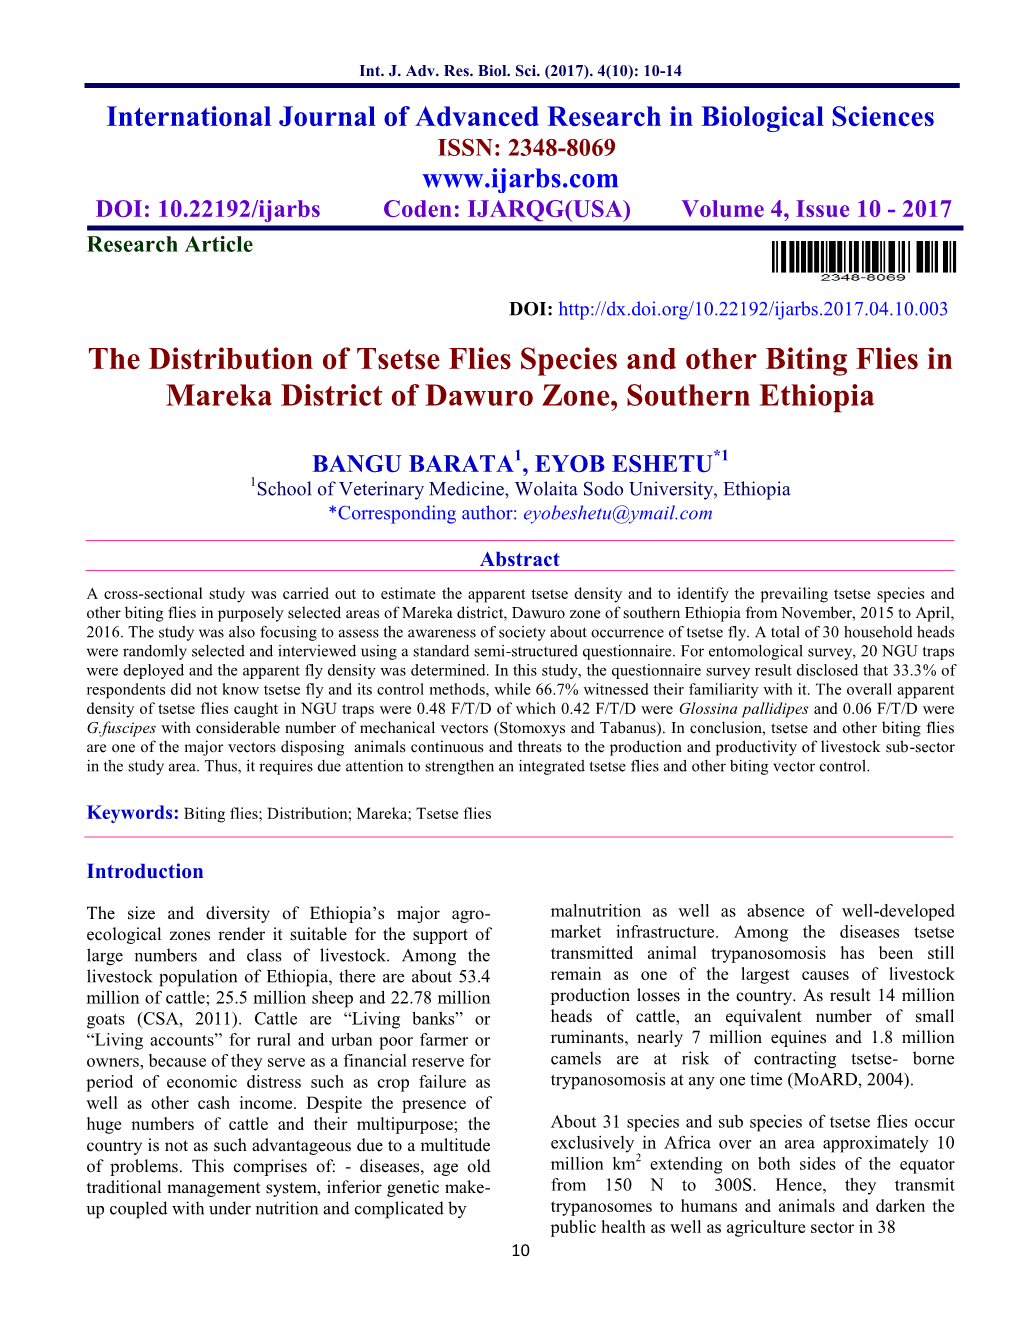 The Distribution of Tsetse Flies Species and Other Biting Flies in Mareka District of Dawuro Zone, Southern Ethiopia